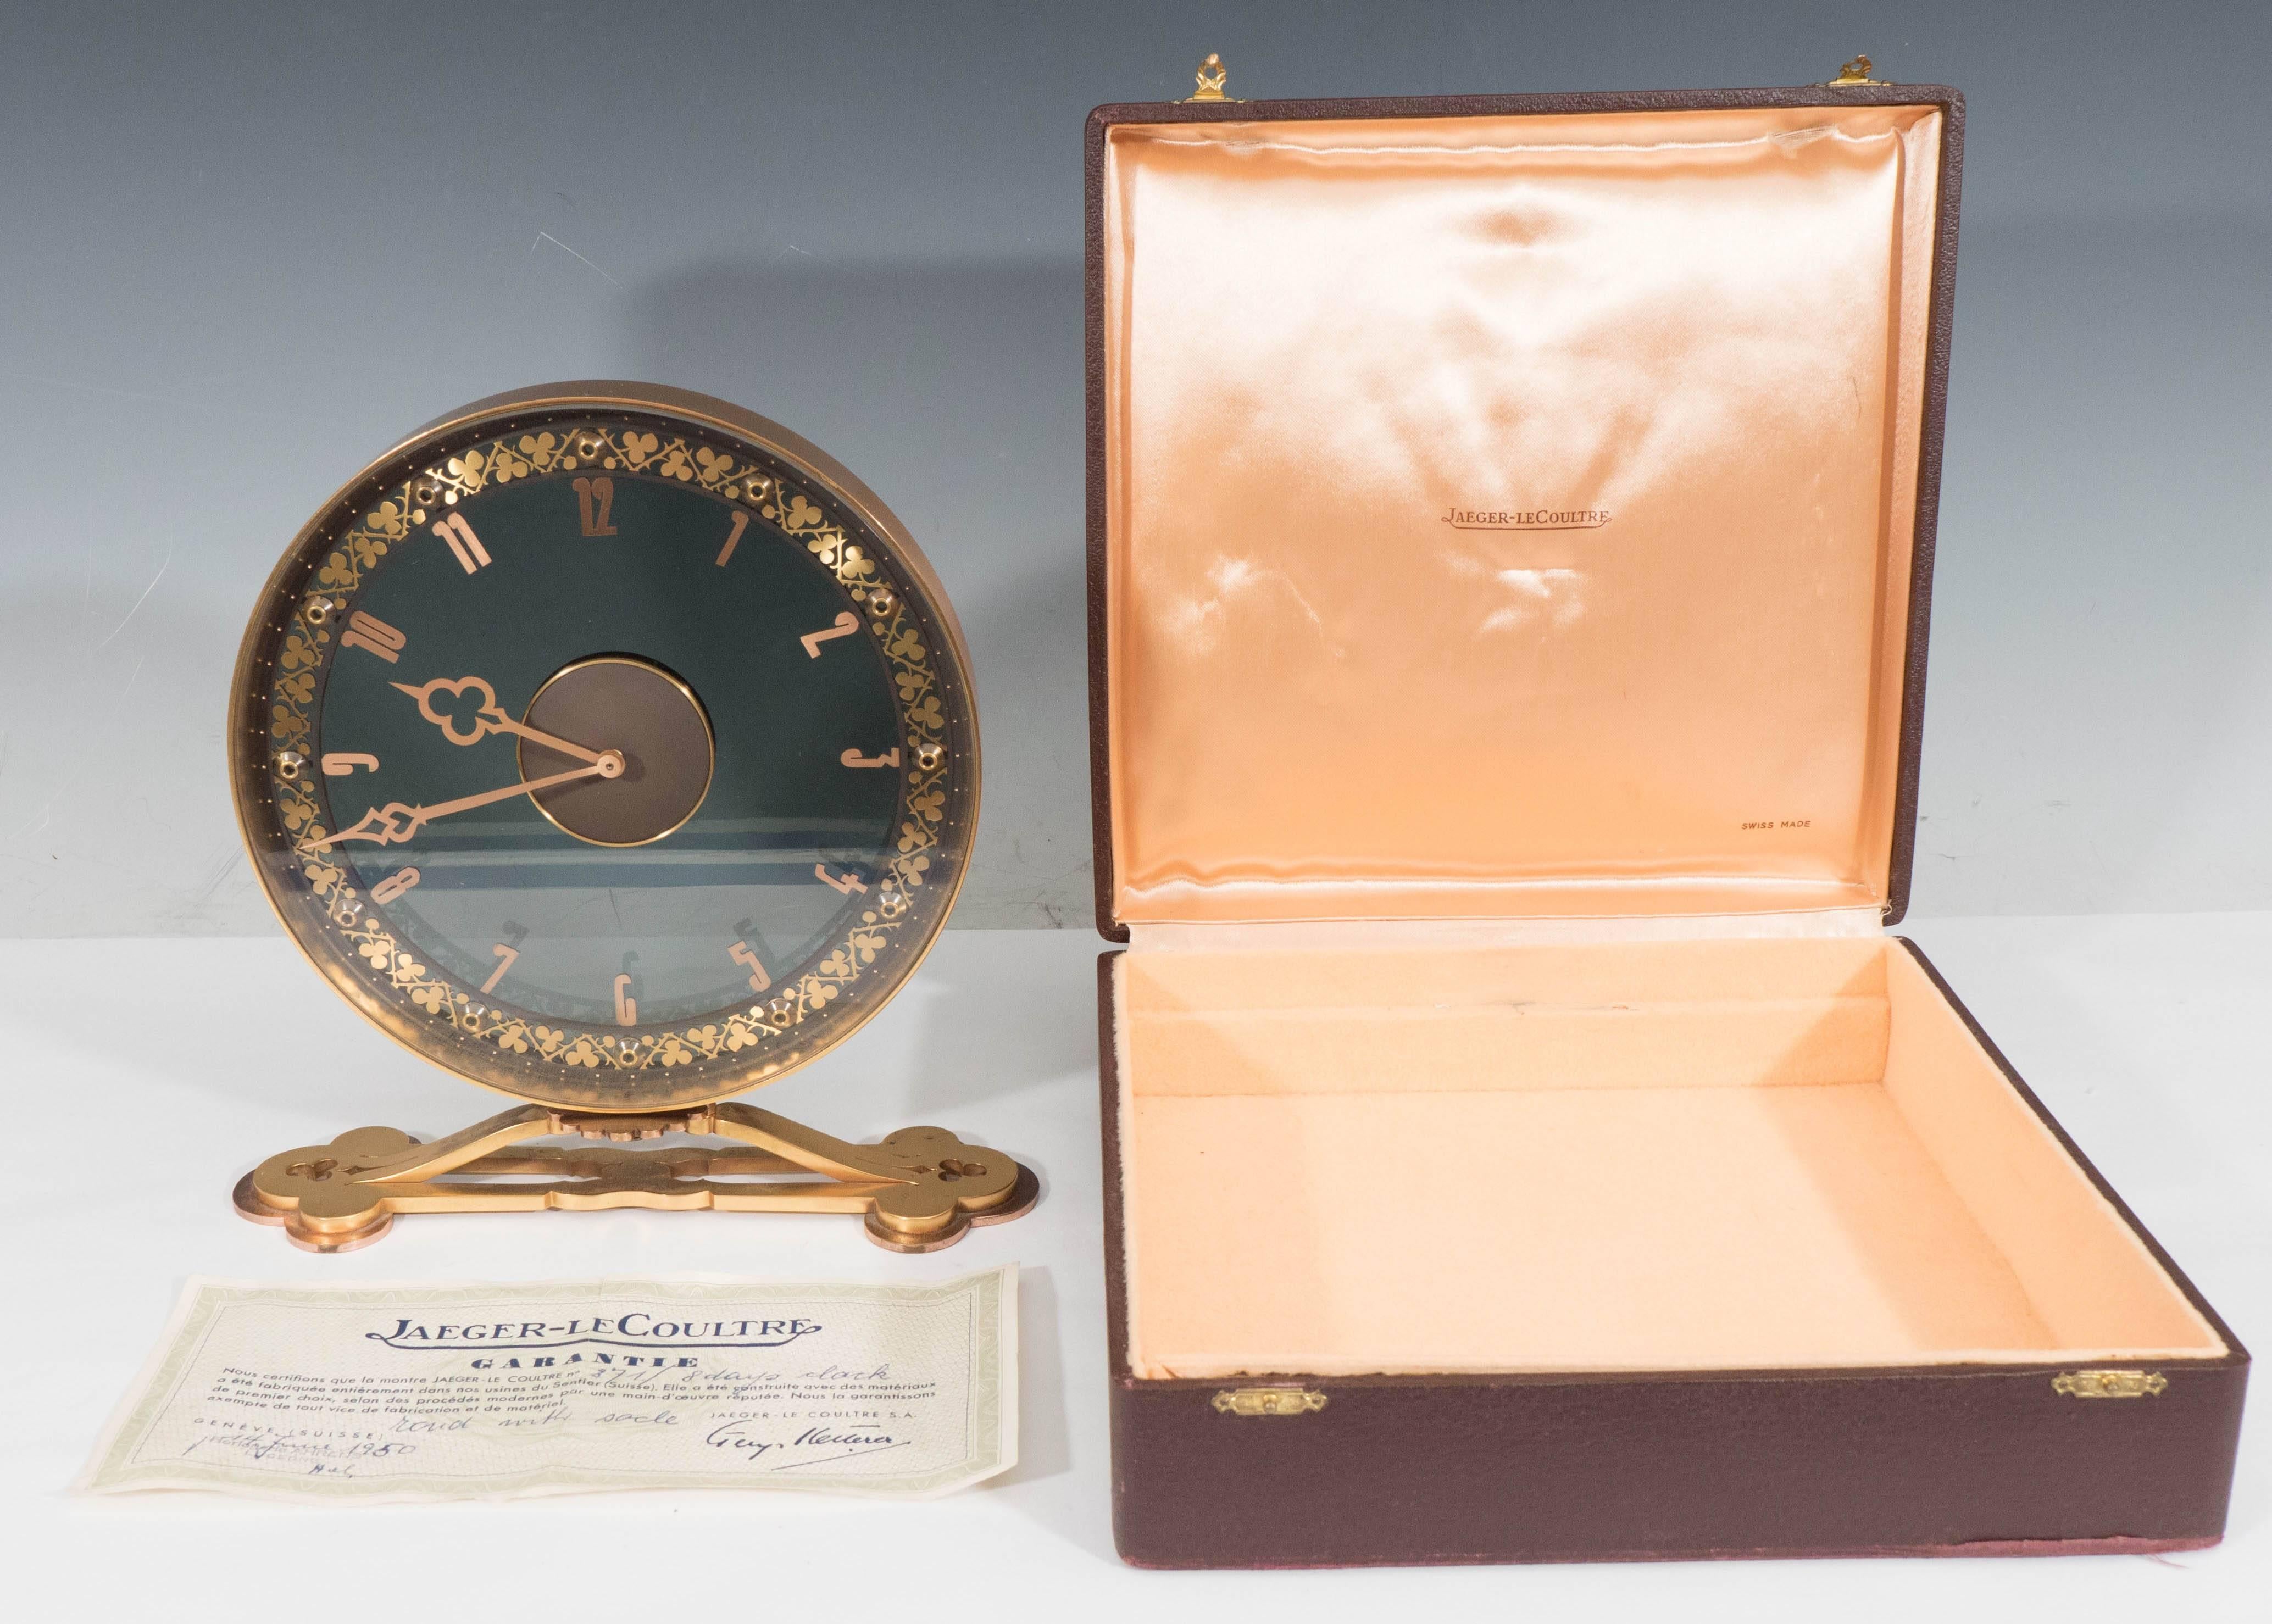 Jaeger-LeCoultre Desk Clock in Gilded Smoked Glass 1